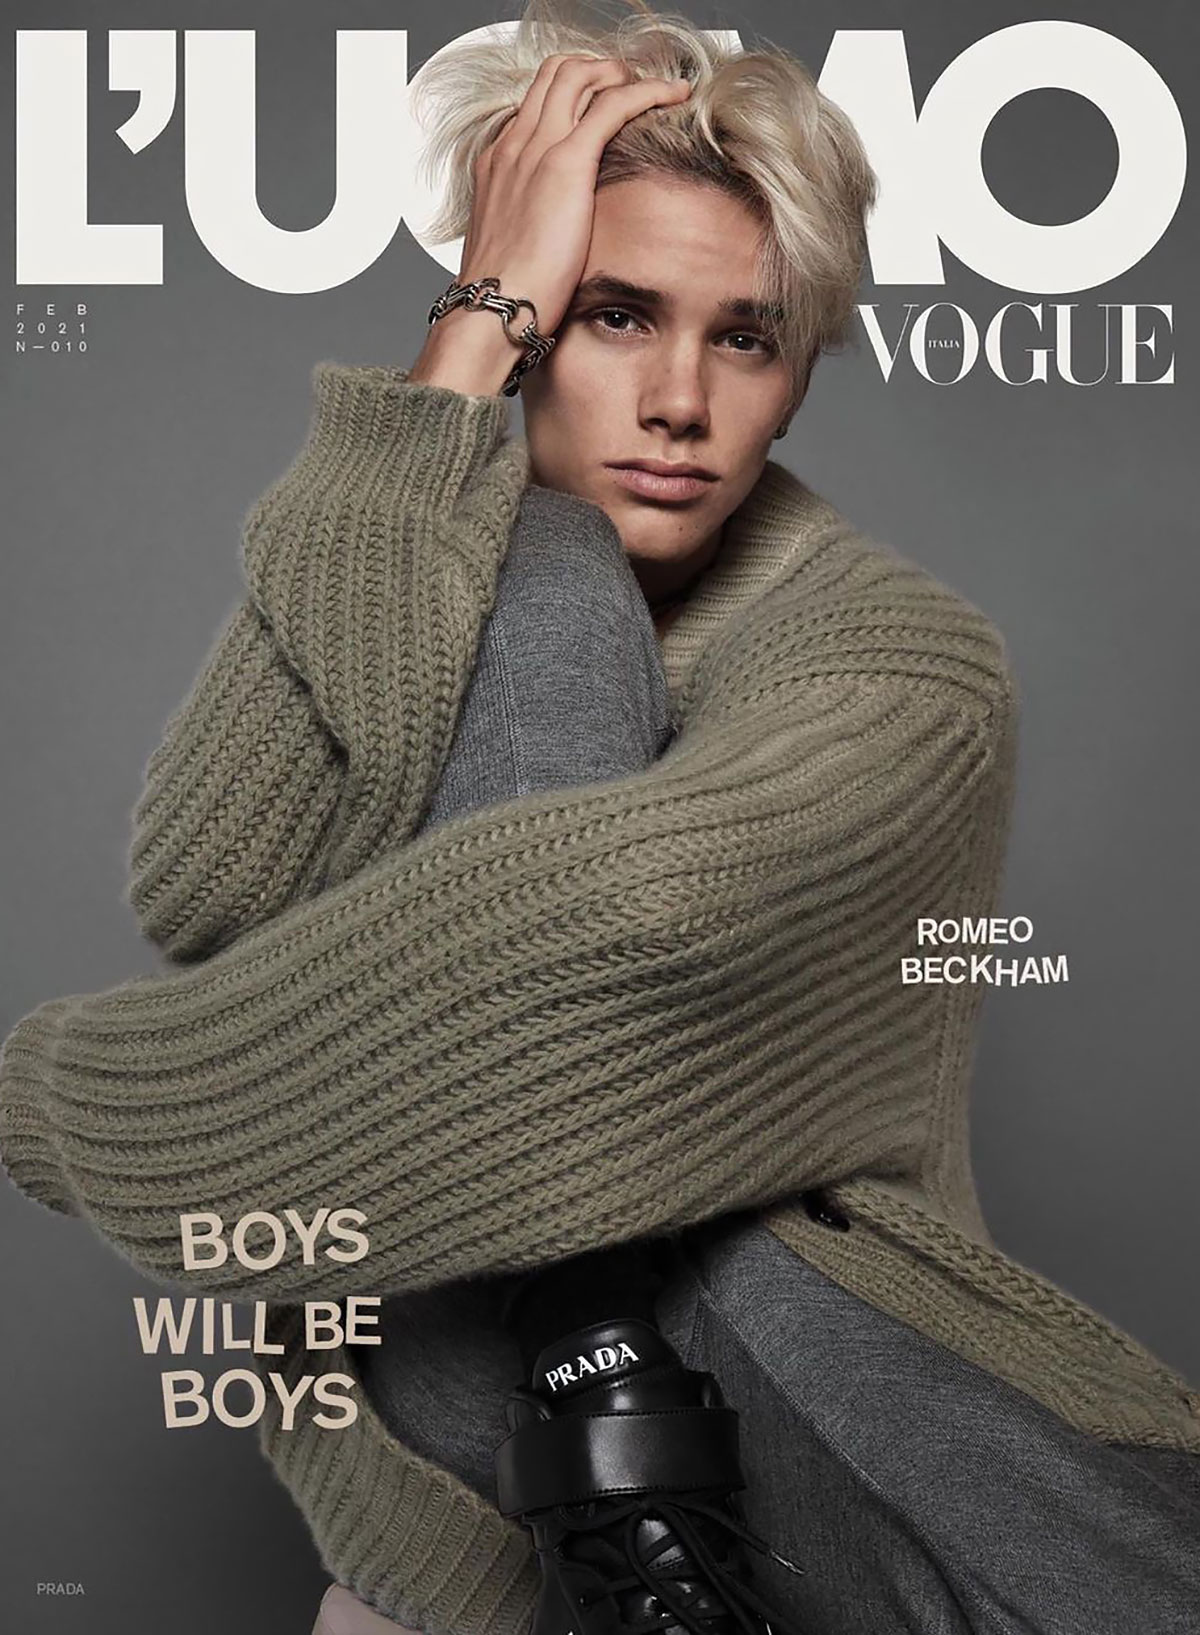 The BOBBY 23 BOYY bag featured in the October issue of Vogue